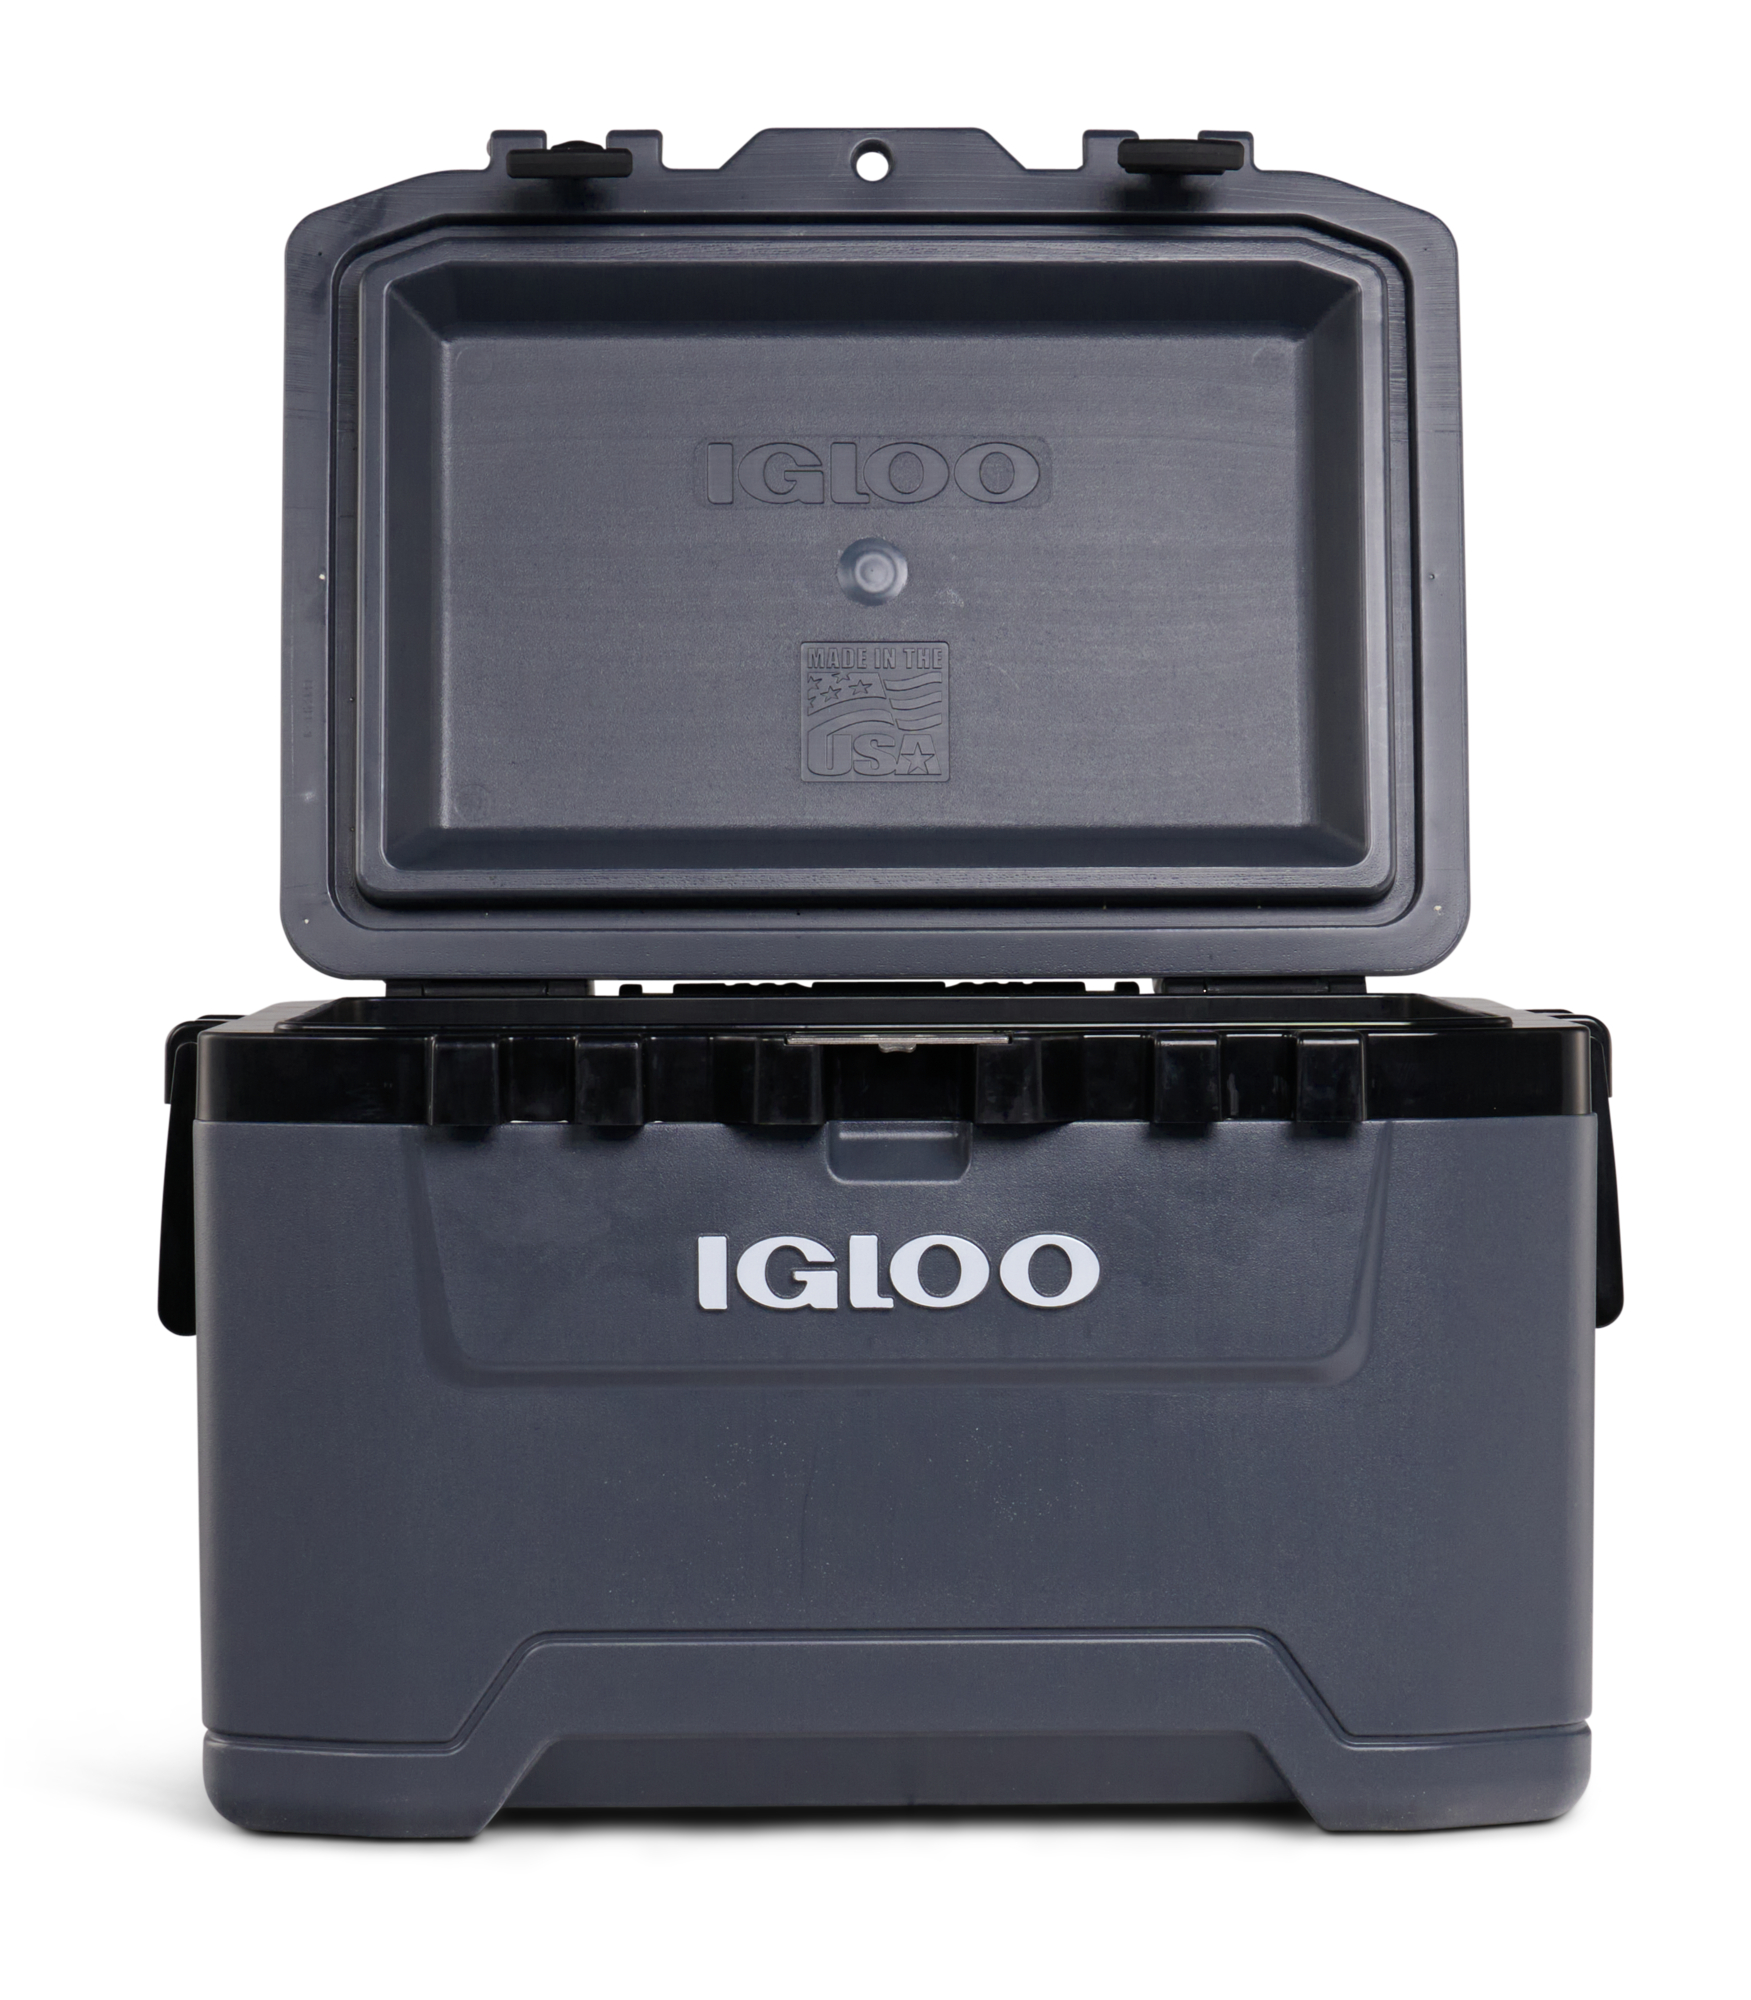 Igloo Overland 52 QT Ice Chest Cooler with Wheels, Gray (26" x 19" x 16") - image 3 of 17